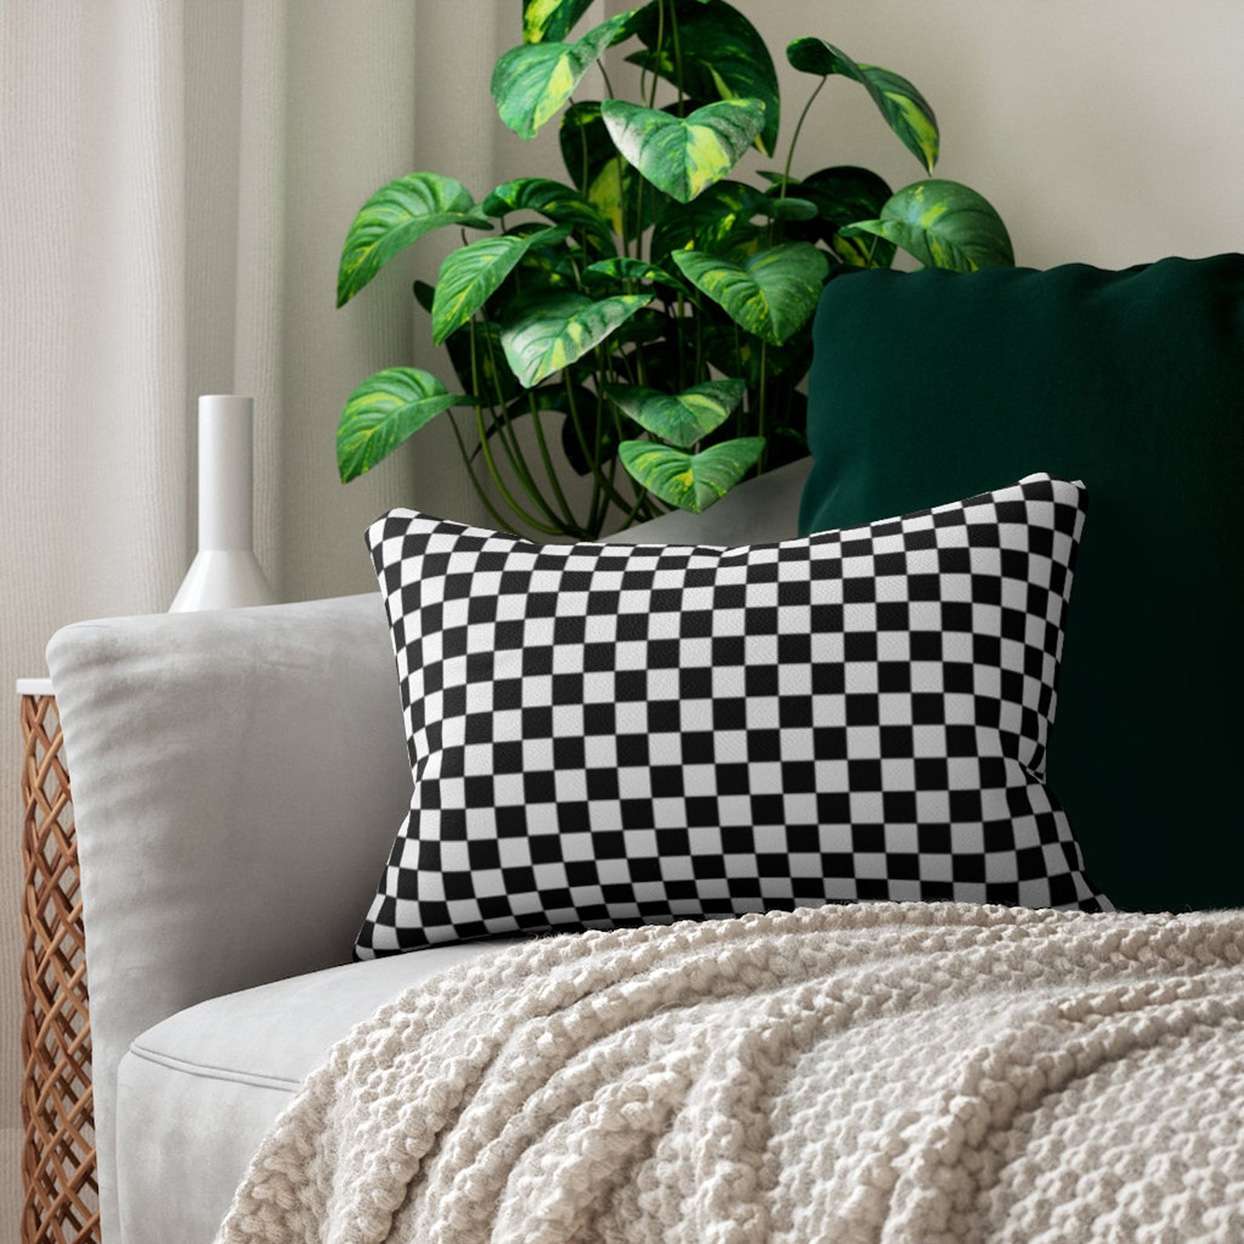 black and white checkerboard pillow on sofa with white knit throw